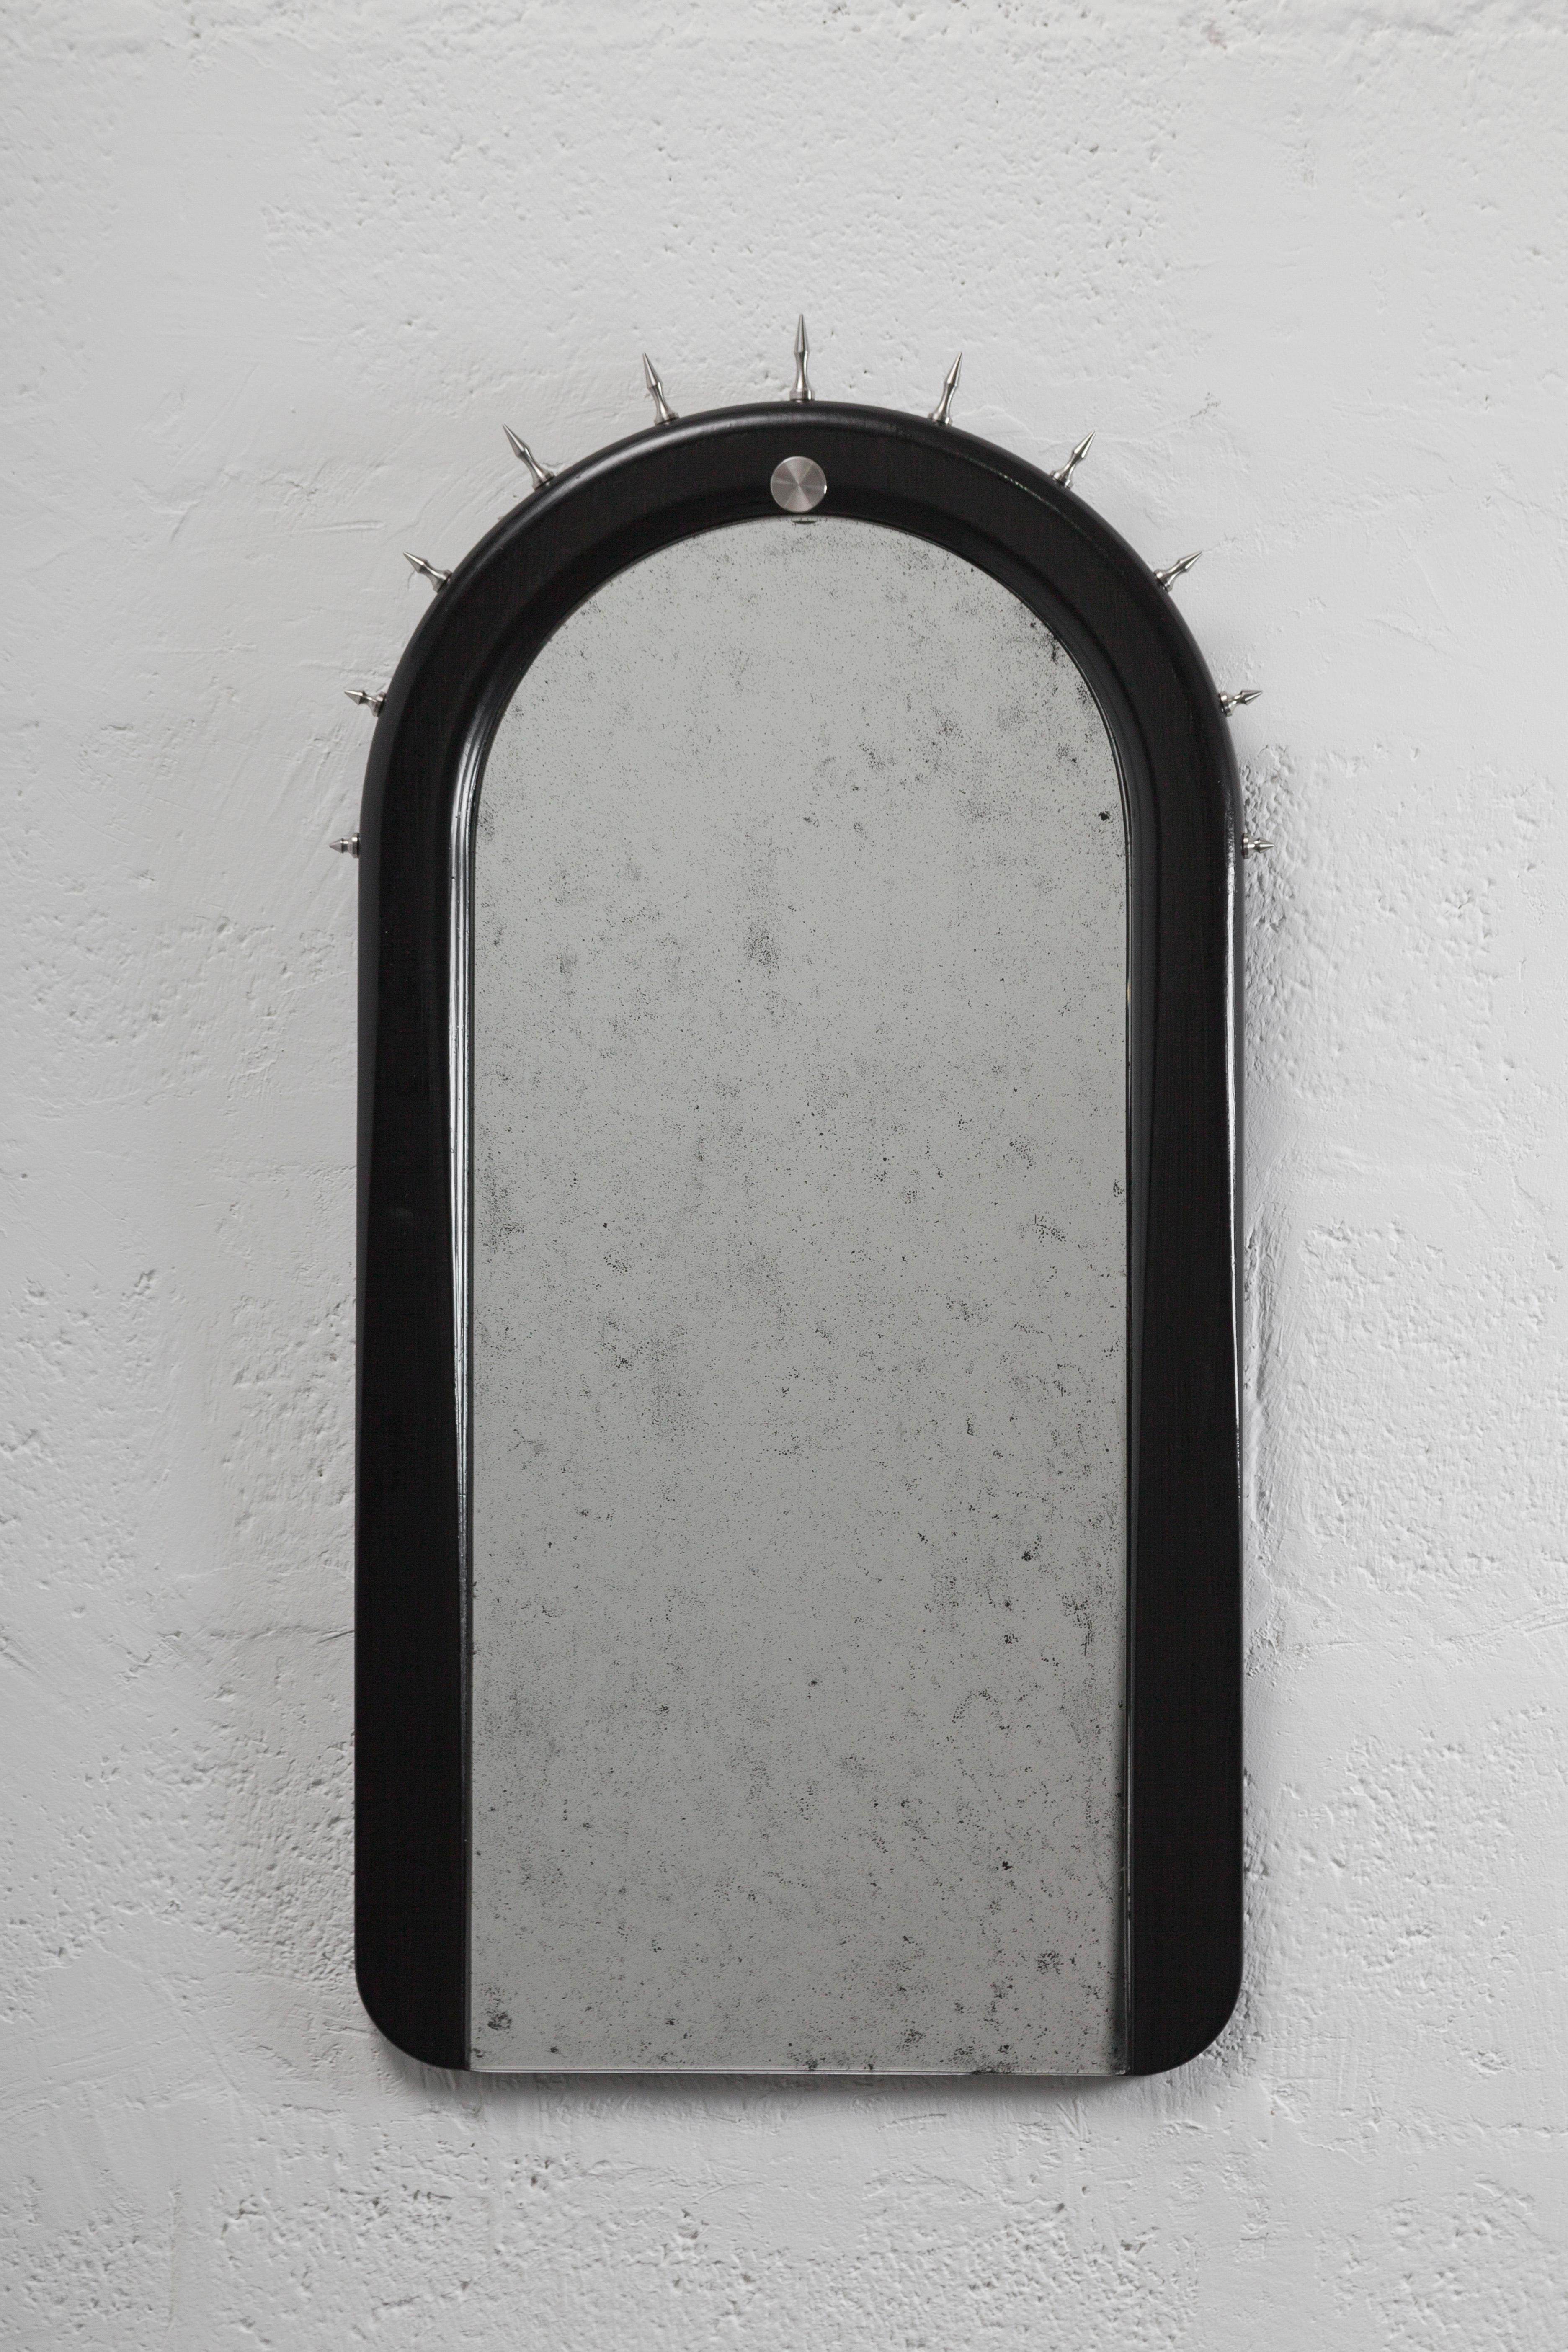 Wall mirror made of solid seike wood body with a natural oil finish, antique mirror glass, and lathed bronze or stainless steel hardware.

SITIERA is ANDEAN's second high-end residential furniture collection. Focused on seating and decorative